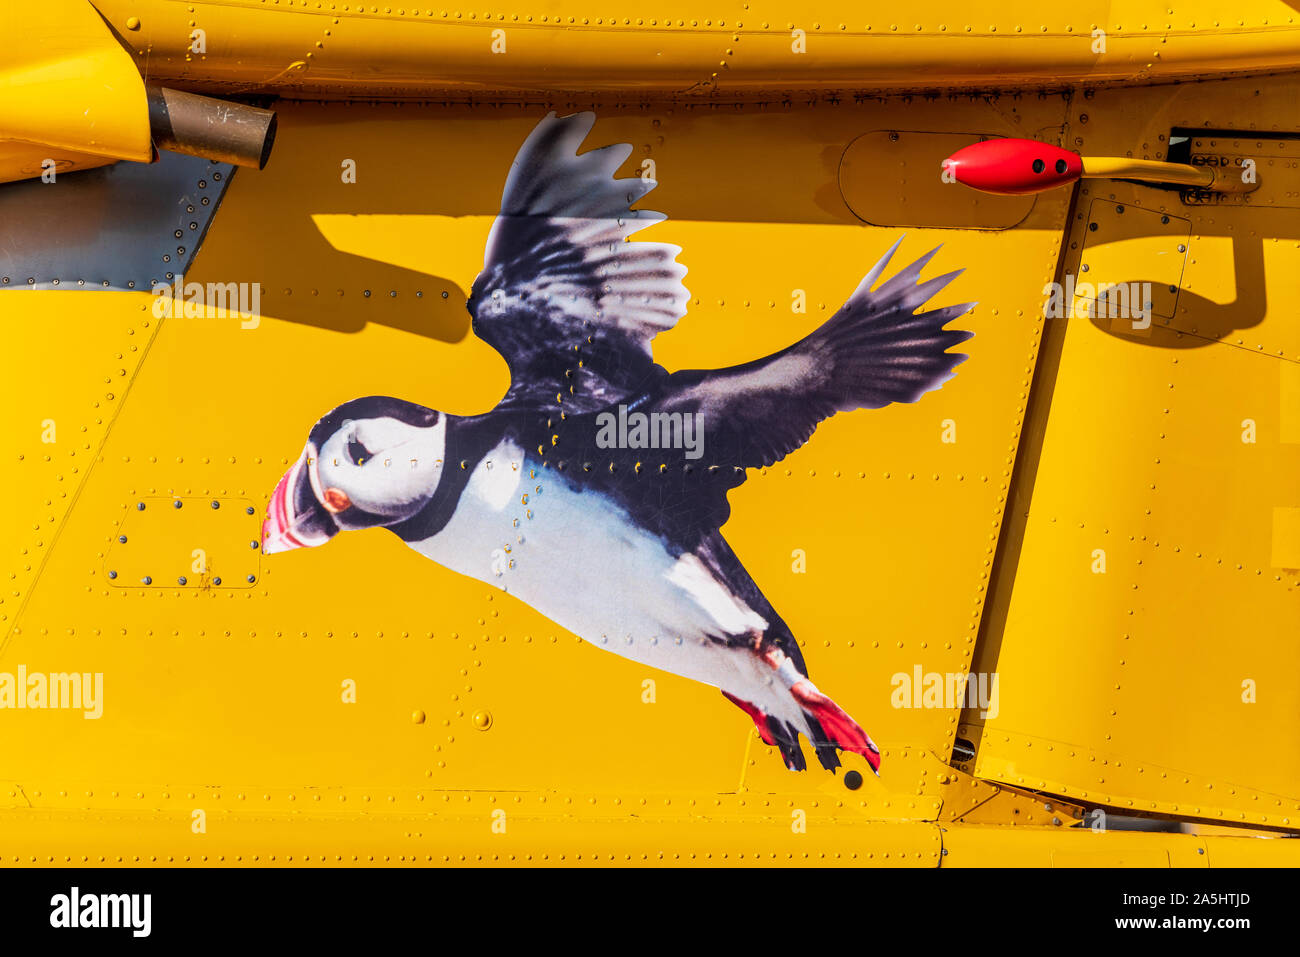 Aurigny airline puffin logo on a Britten-Norman Trislander aircraft. Aurigny is the airline of Guernsey in the Channel Islands. Stock Photo